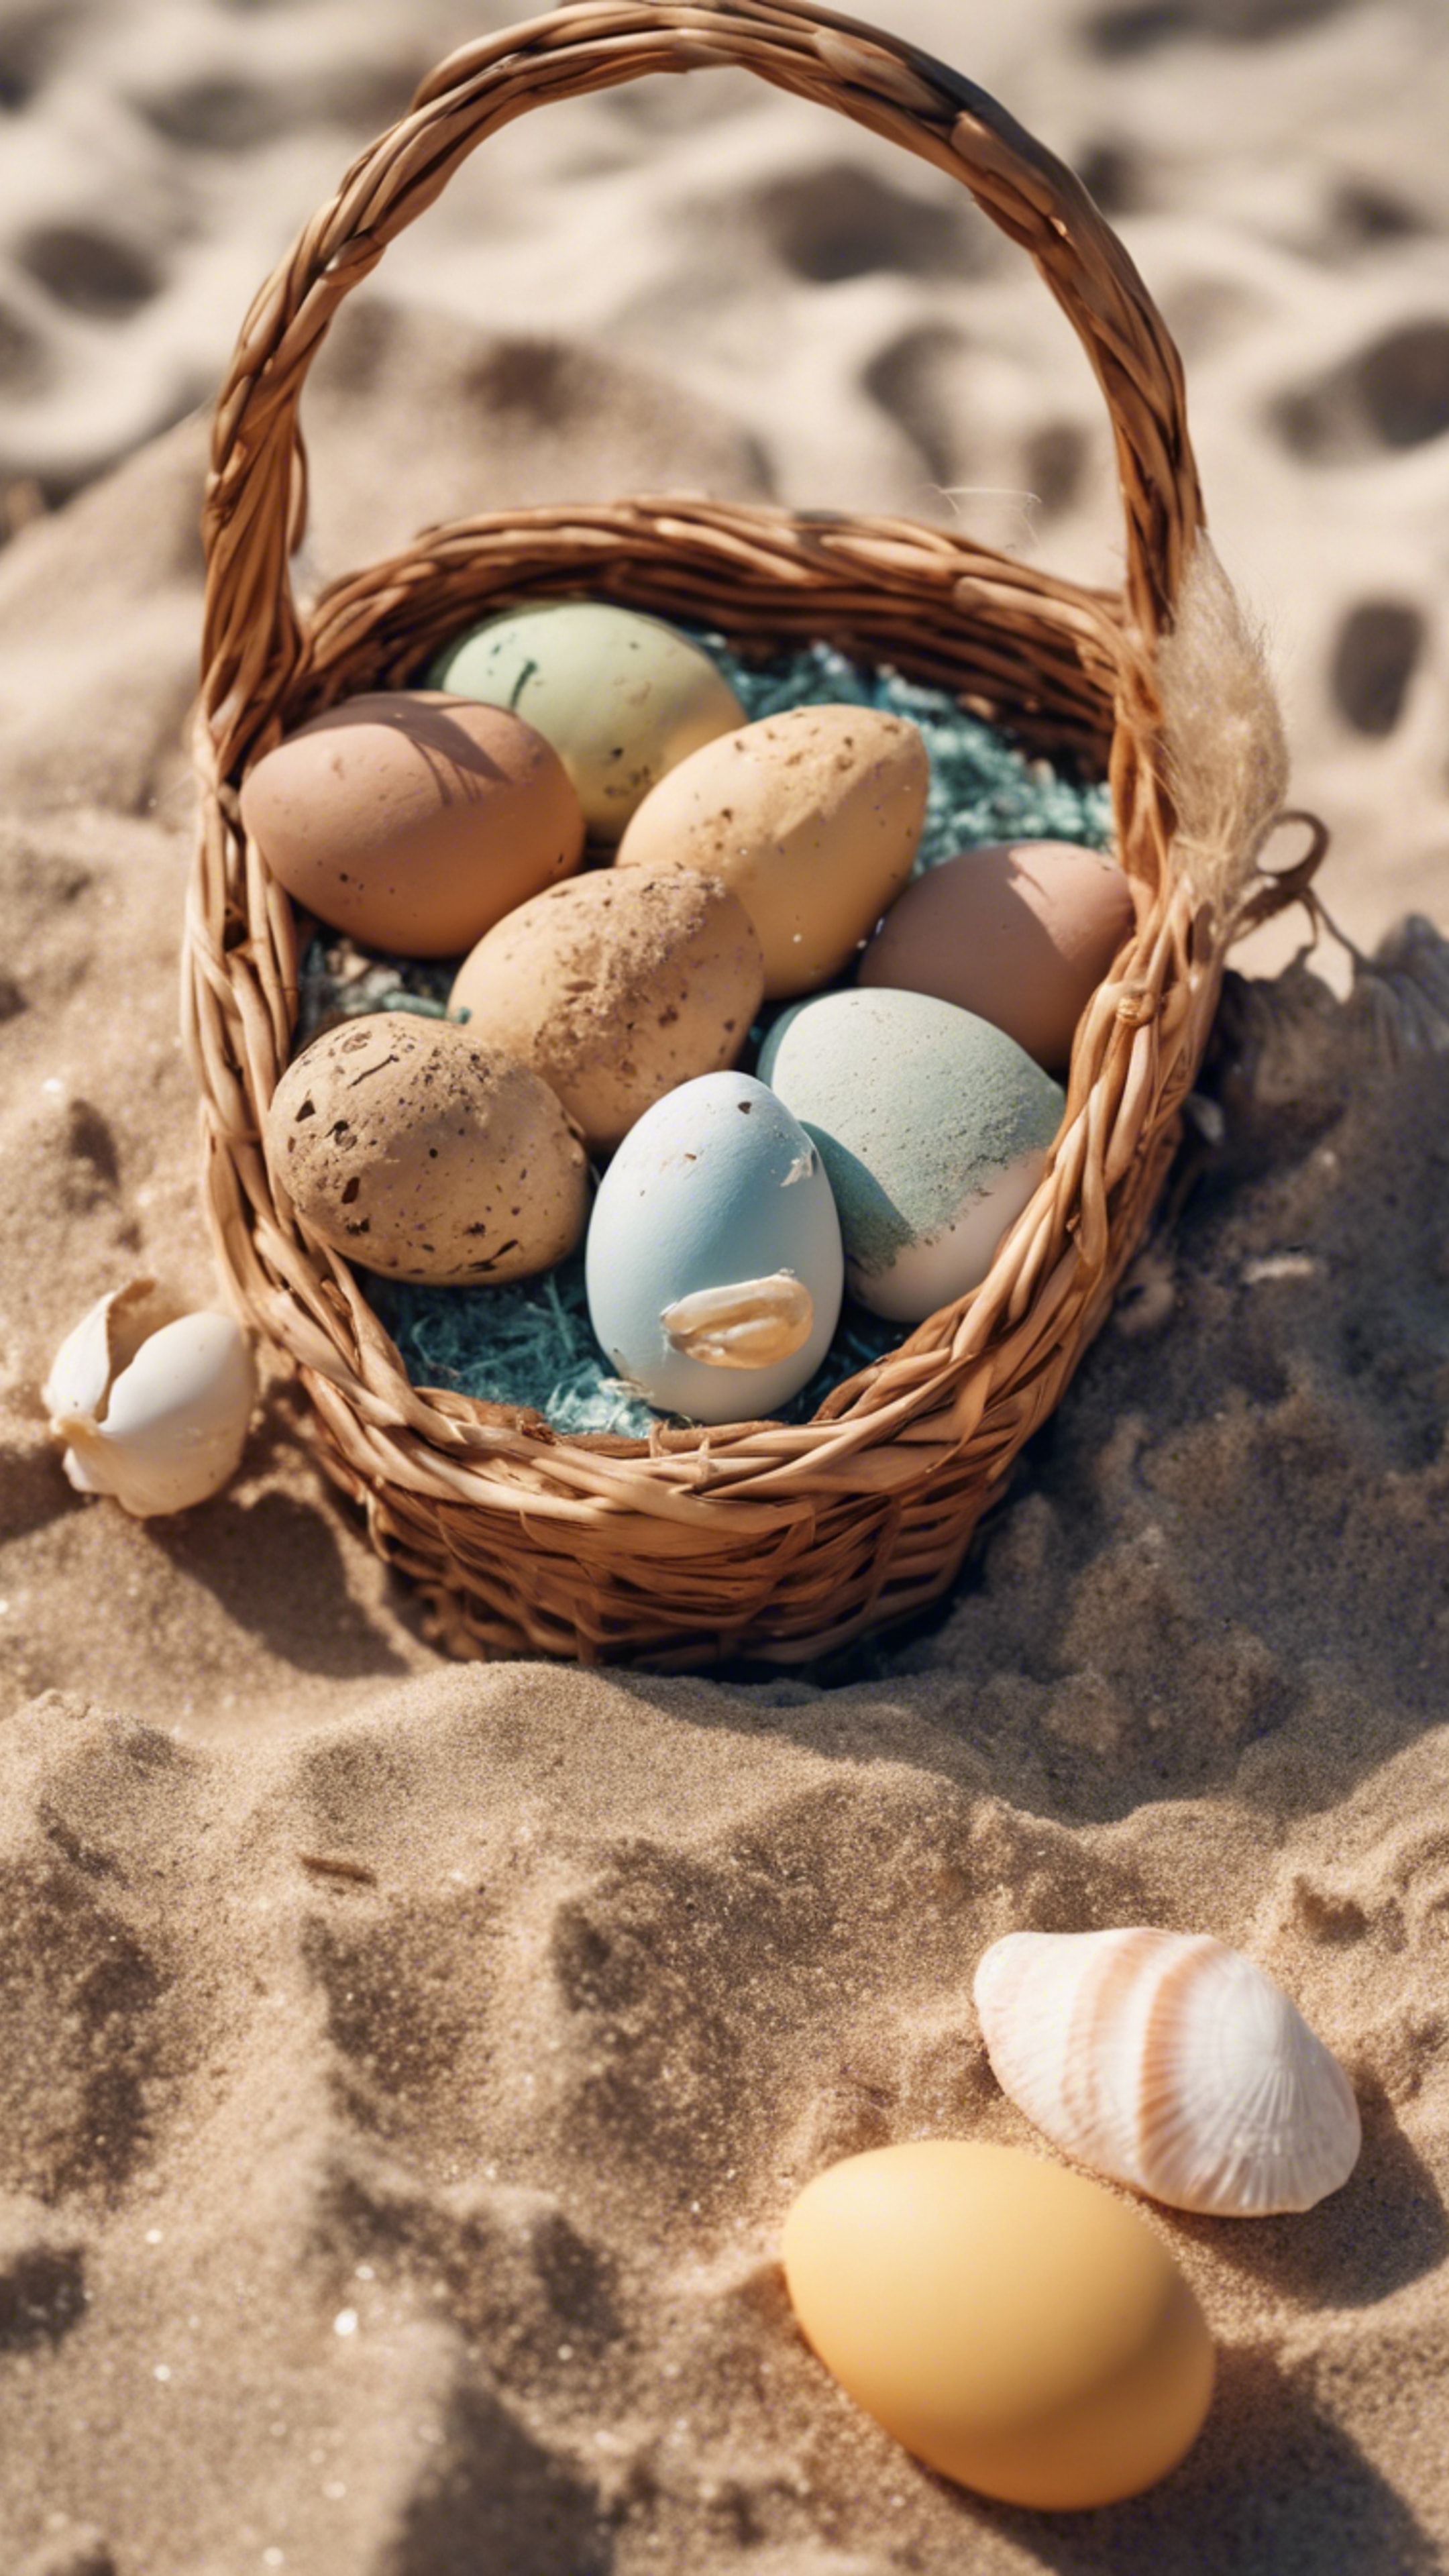 Easter picnic at a beach, with a creative sand-bunny and seashell eggs.壁紙[f1f41cf673db48f88e6d]